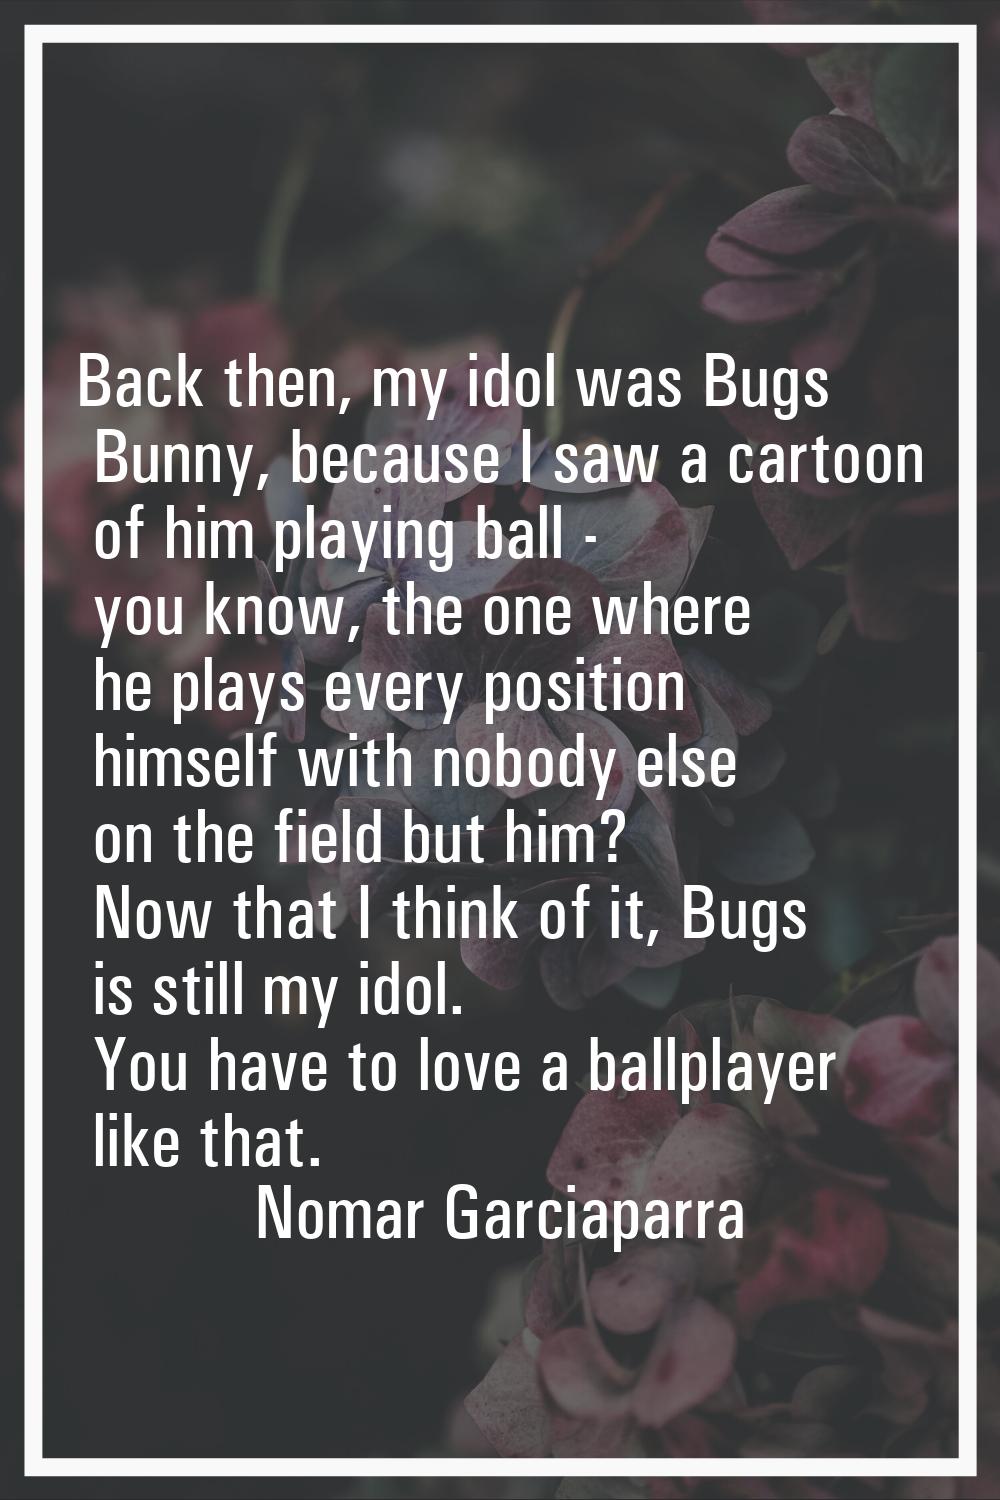 Back then, my idol was Bugs Bunny, because I saw a cartoon of him playing ball - you know, the one 